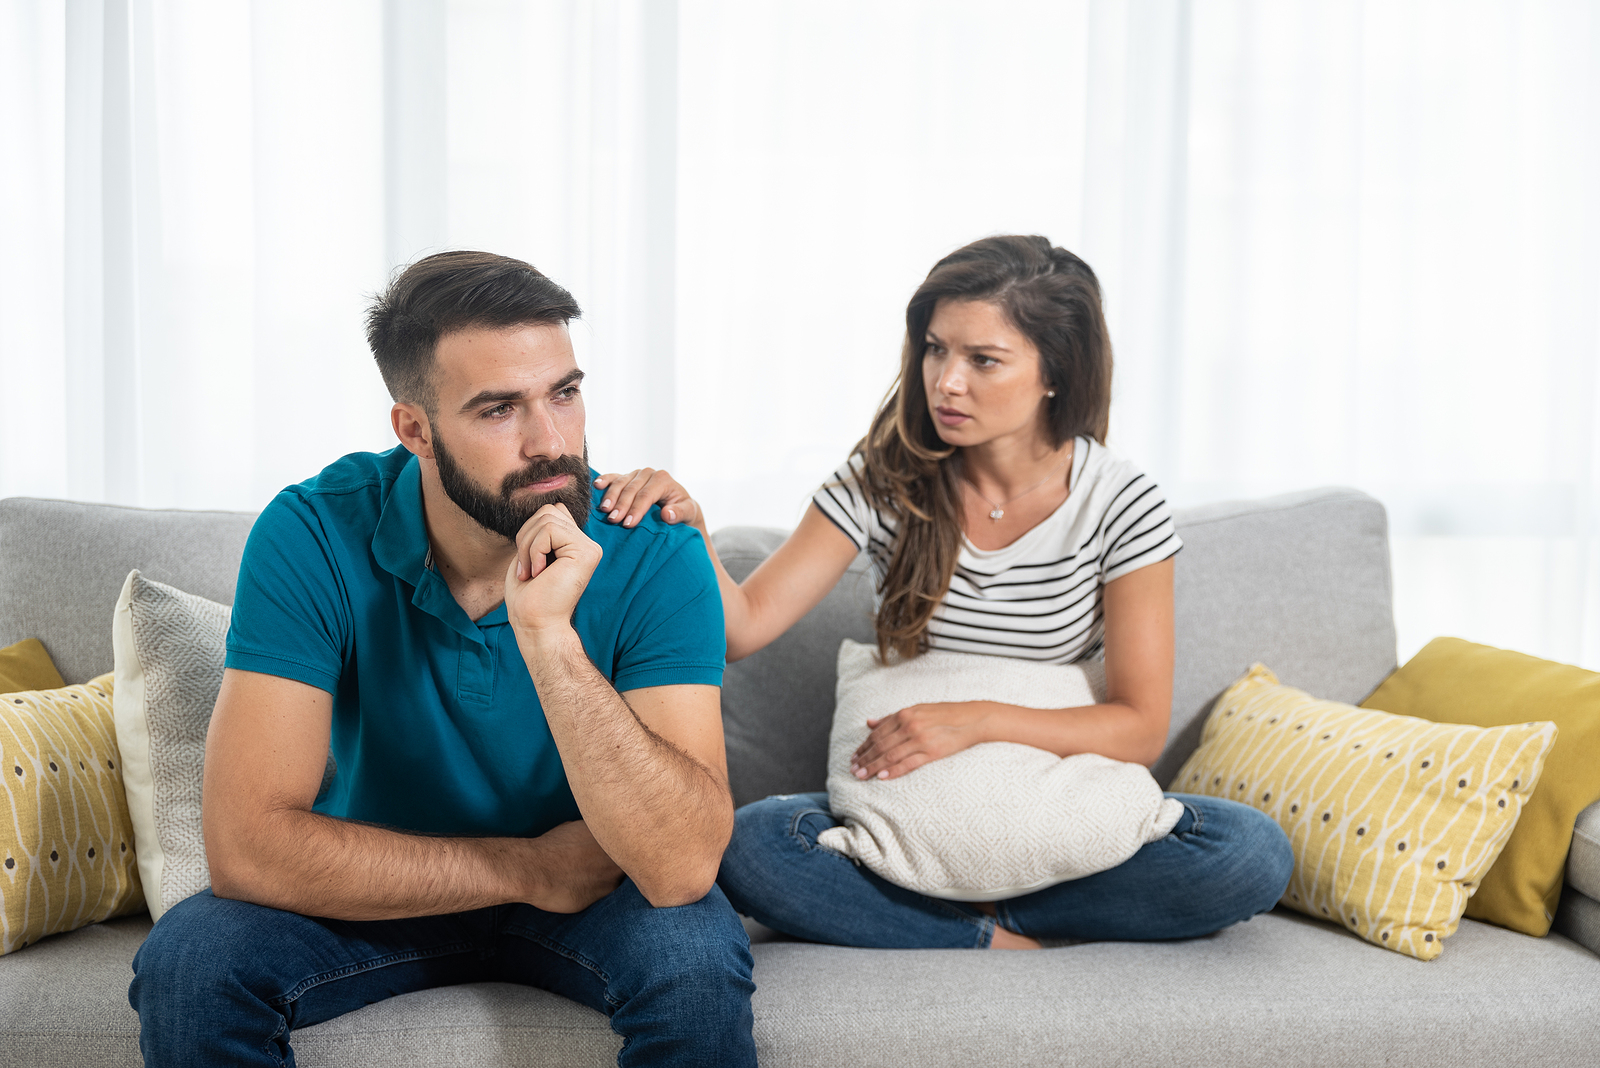 A young couple sits together on a couch, the man is thinking with his hand on his chin and the she is worried with her hand on him.